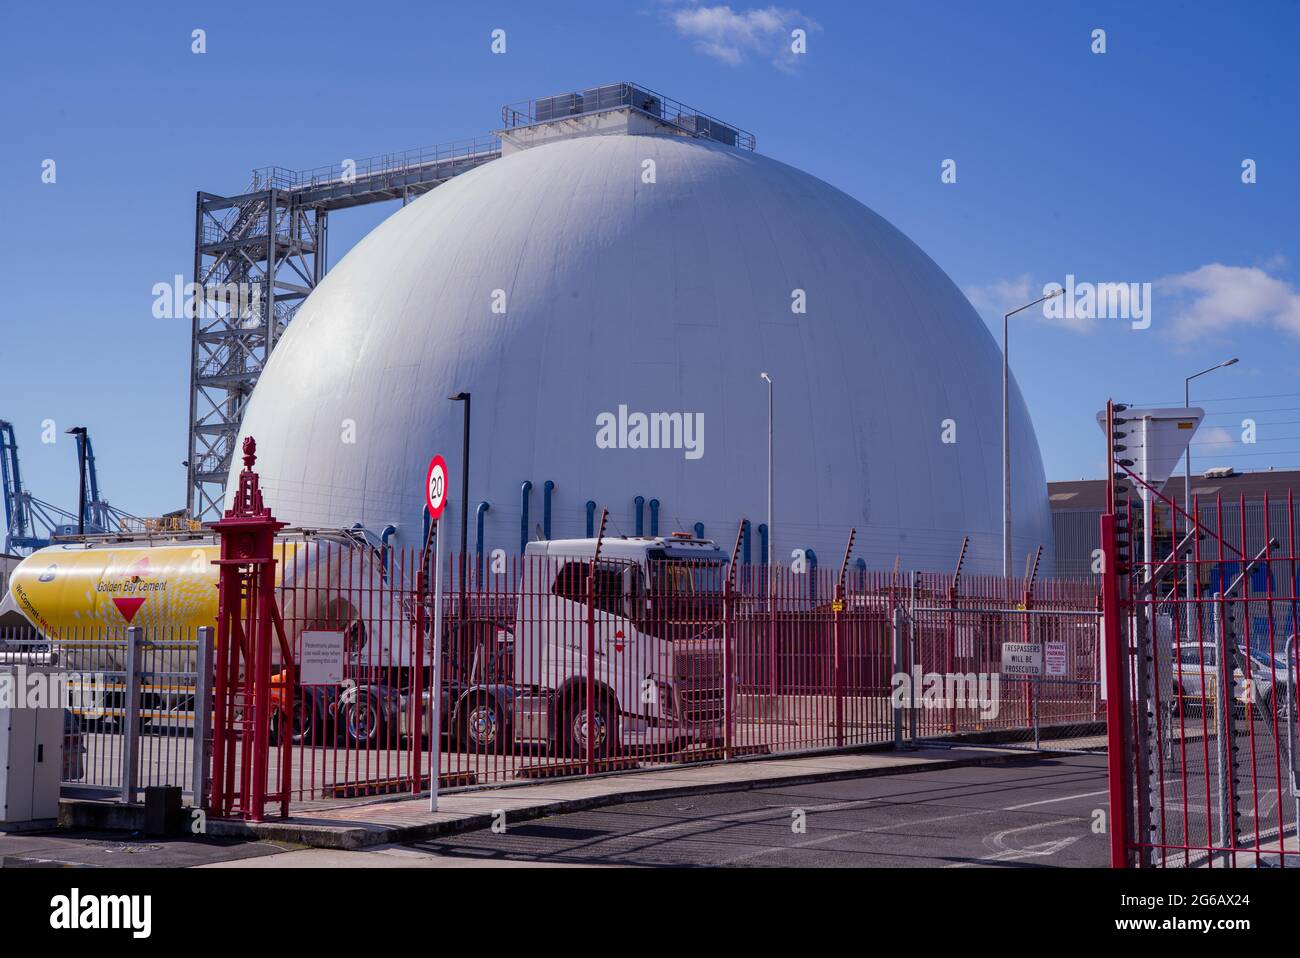 Cement silos at the Ports of Auckland Stock Photo